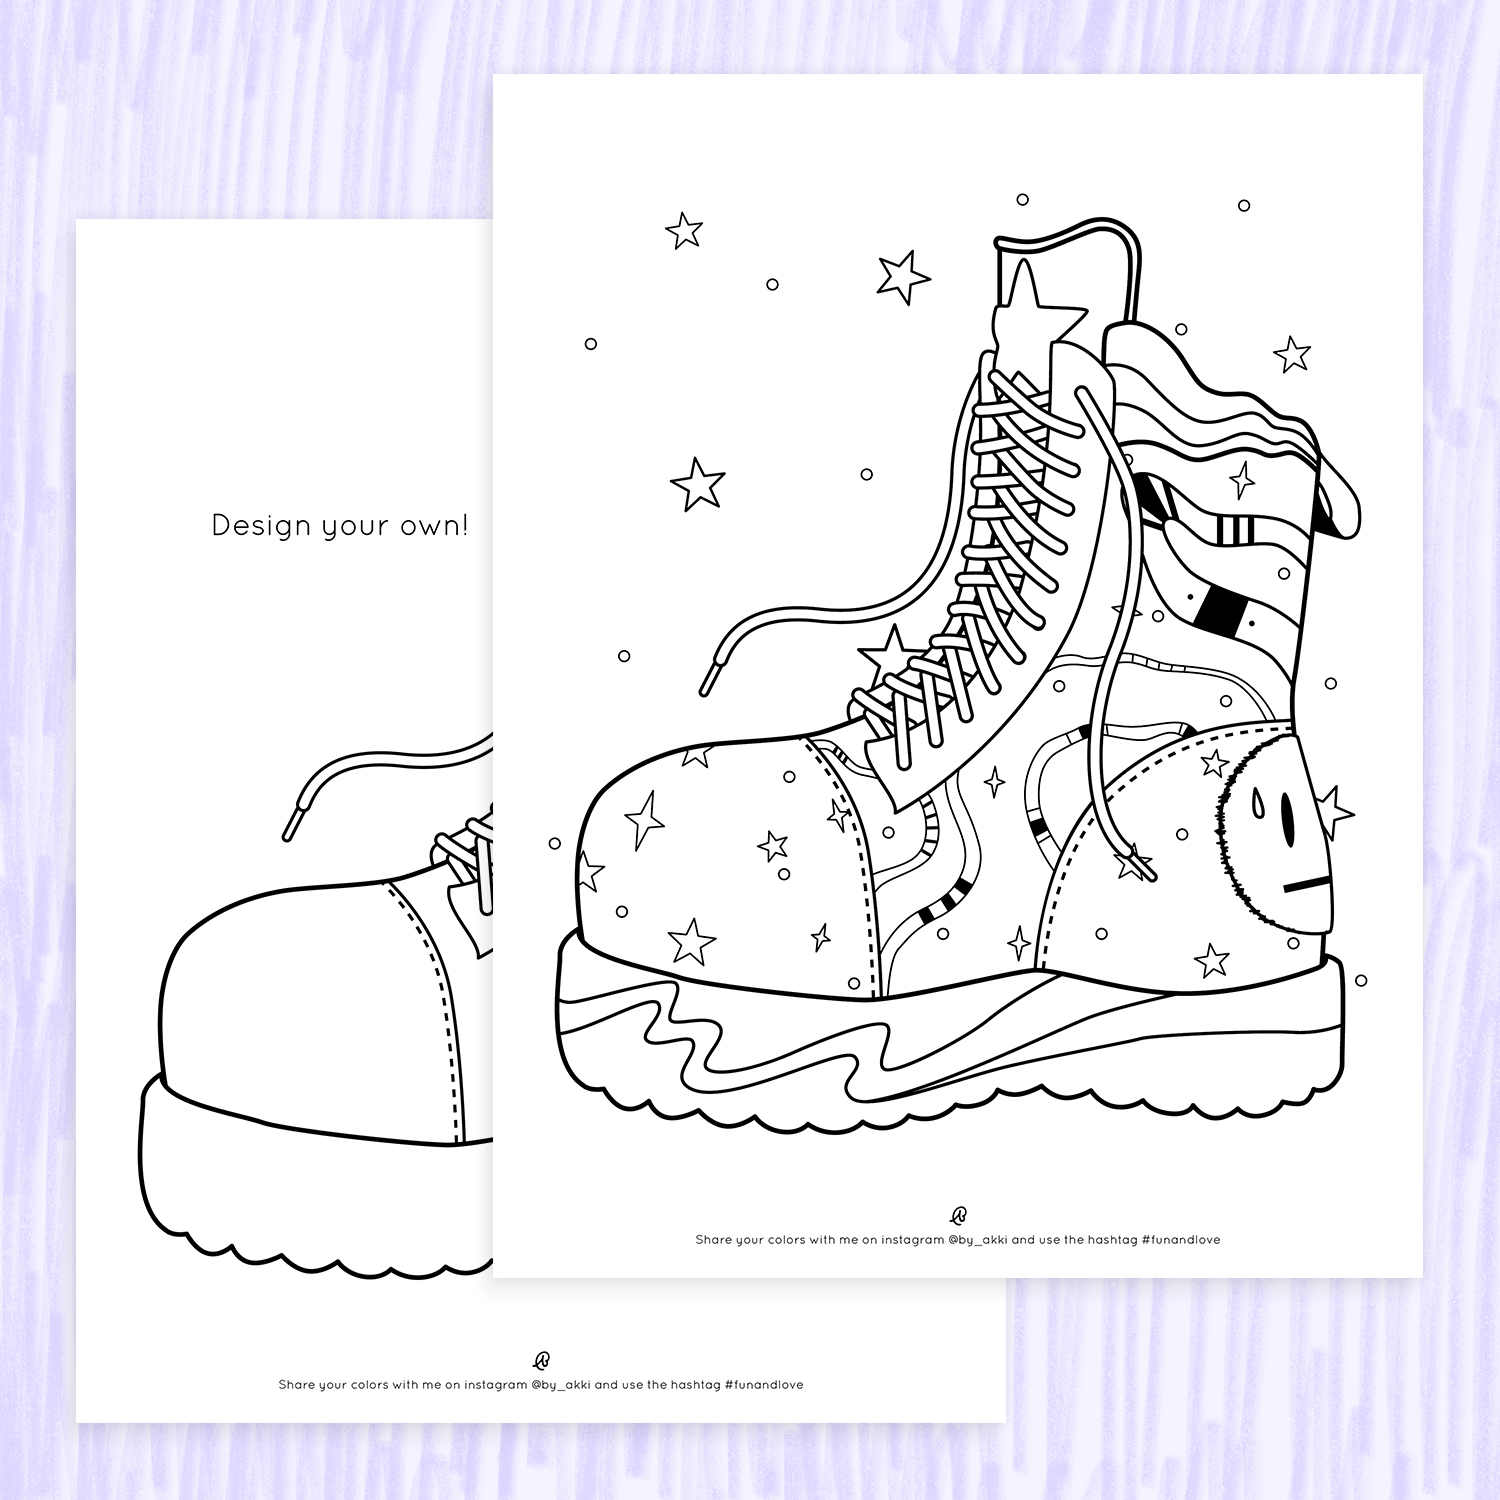 coloring pages work boots